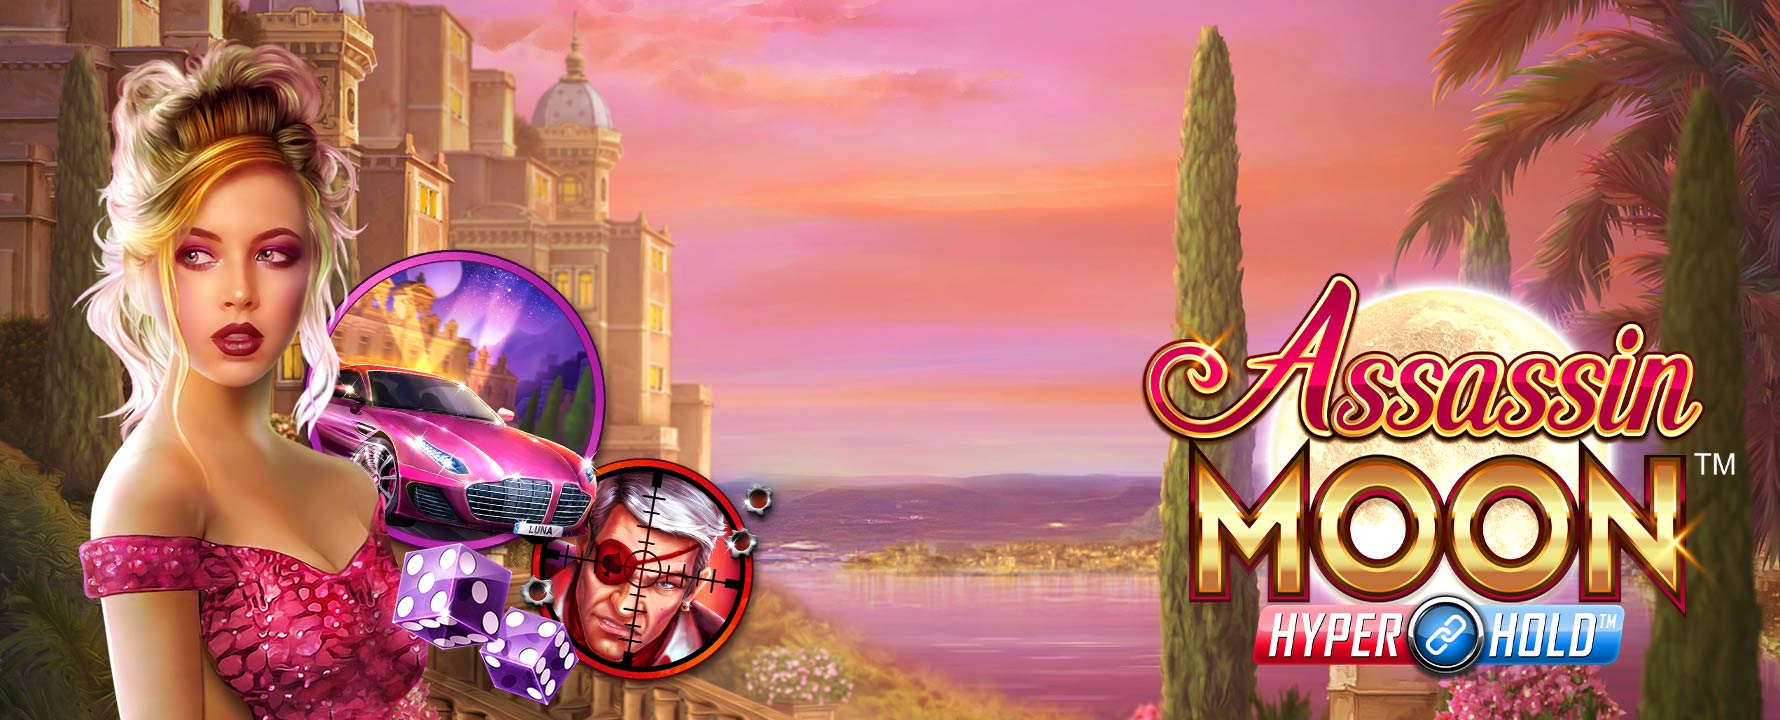 Experience the Assassin Moon™ online slot by Triple Edge Studios for Microgaming